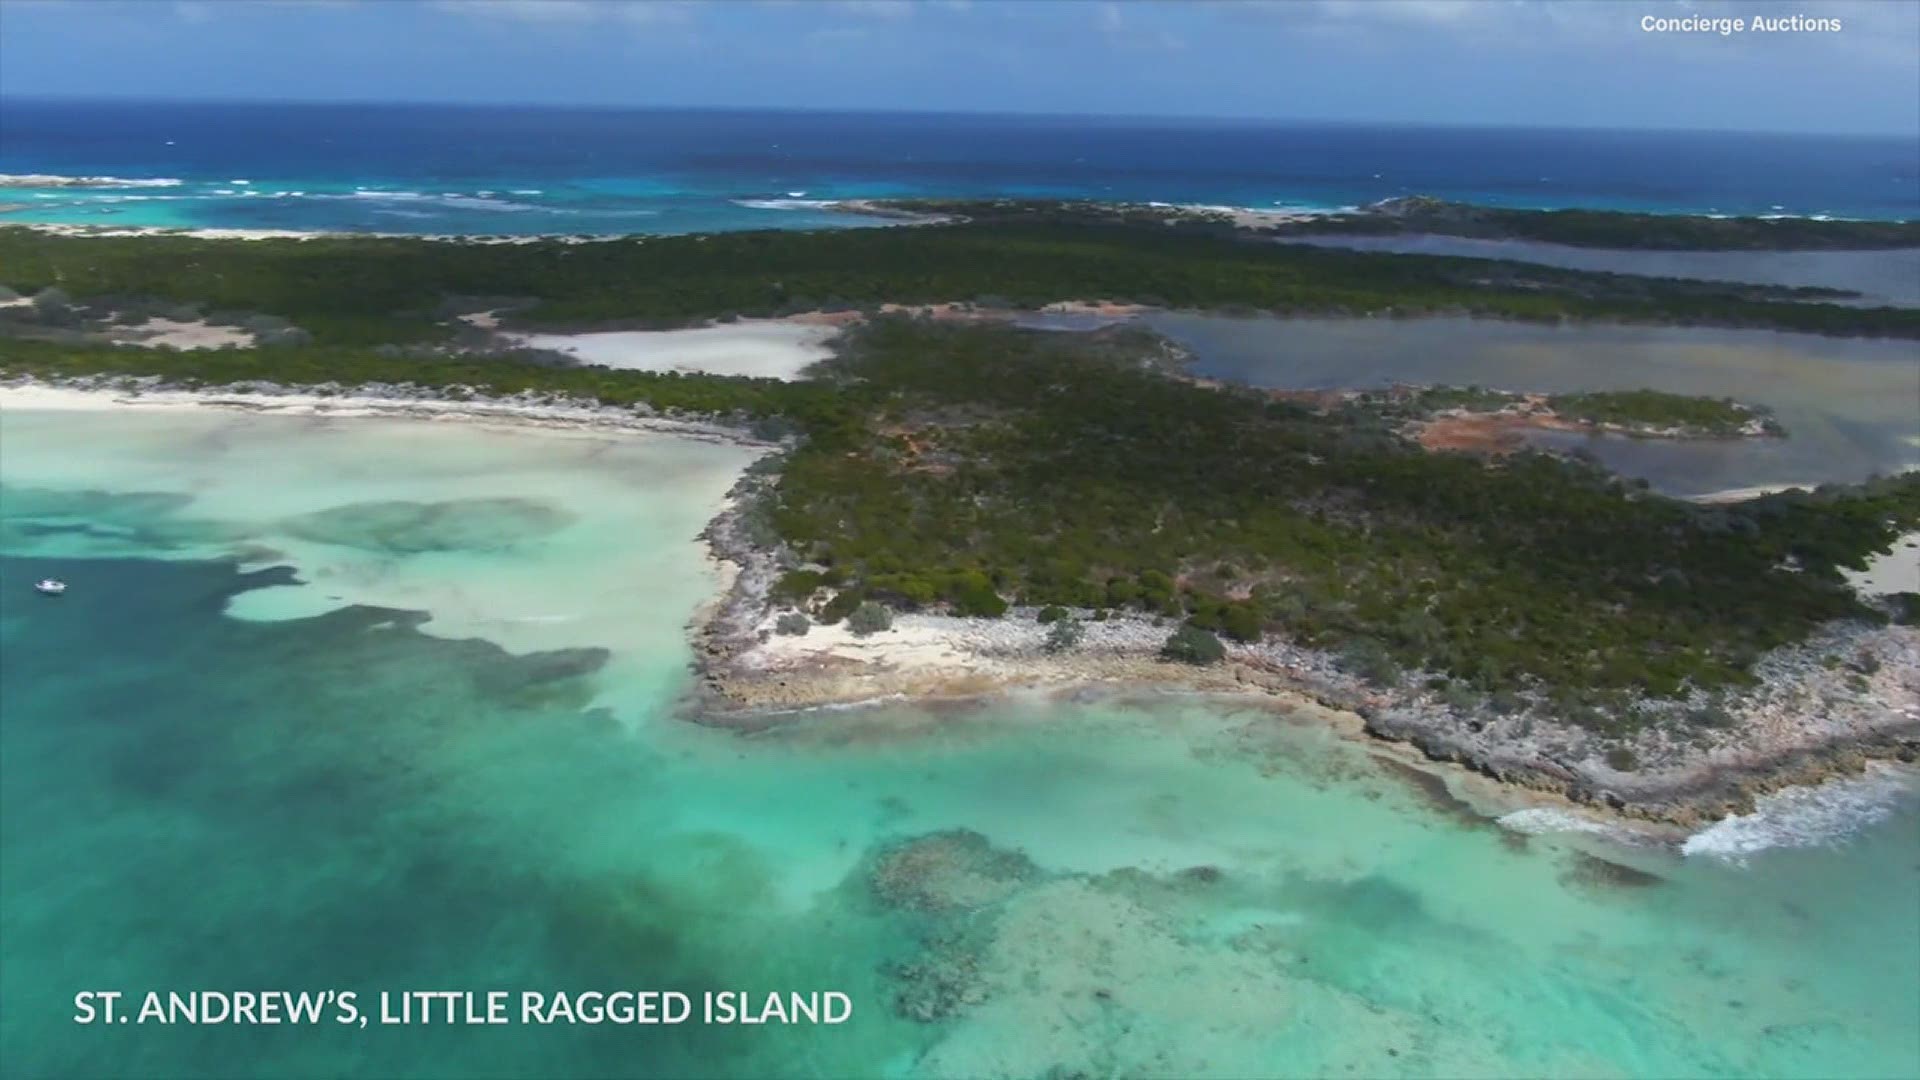 Little Ragged Island, also known as St Andrew's, is the largest private island currently for sale in the Caribbean paradise.